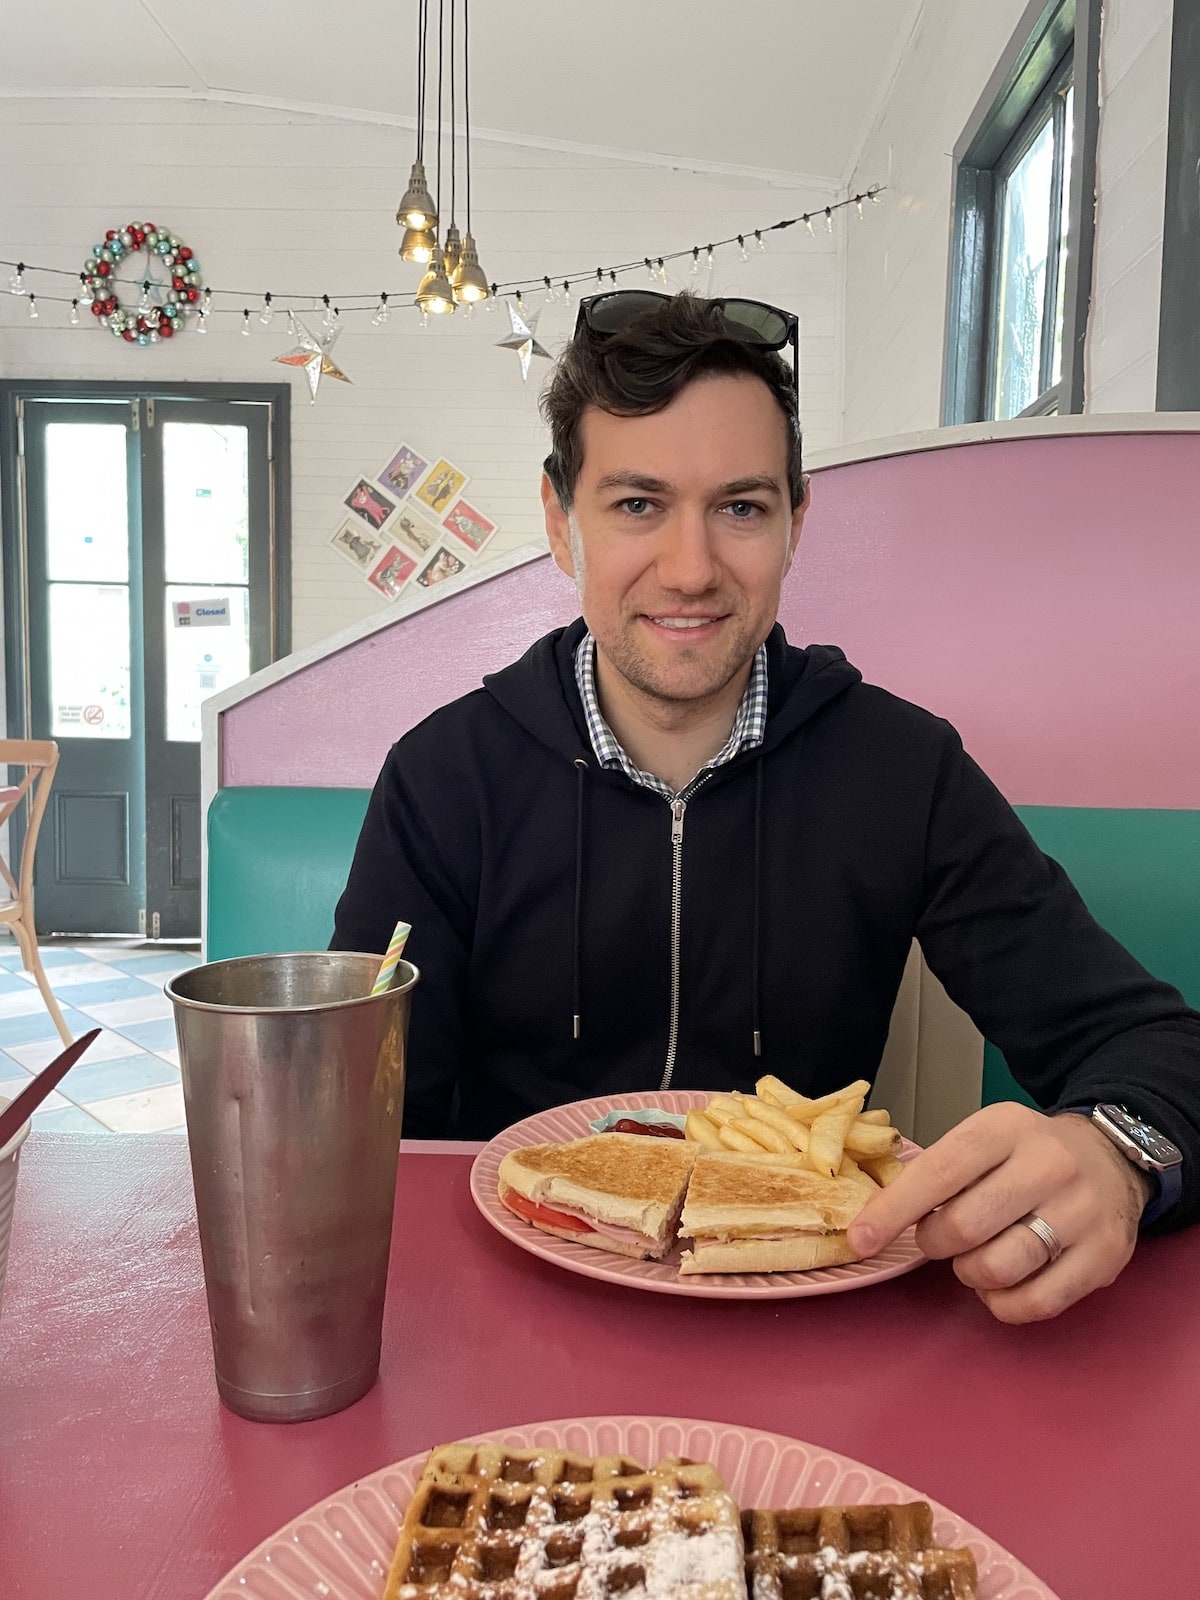 Nick, wearing a dark jacket, sitting in the pink booth of a diner with a plate of chips and a ham and cheese toastie, and a stainless steel milkshake cup. In the foreground is a plate of waffles